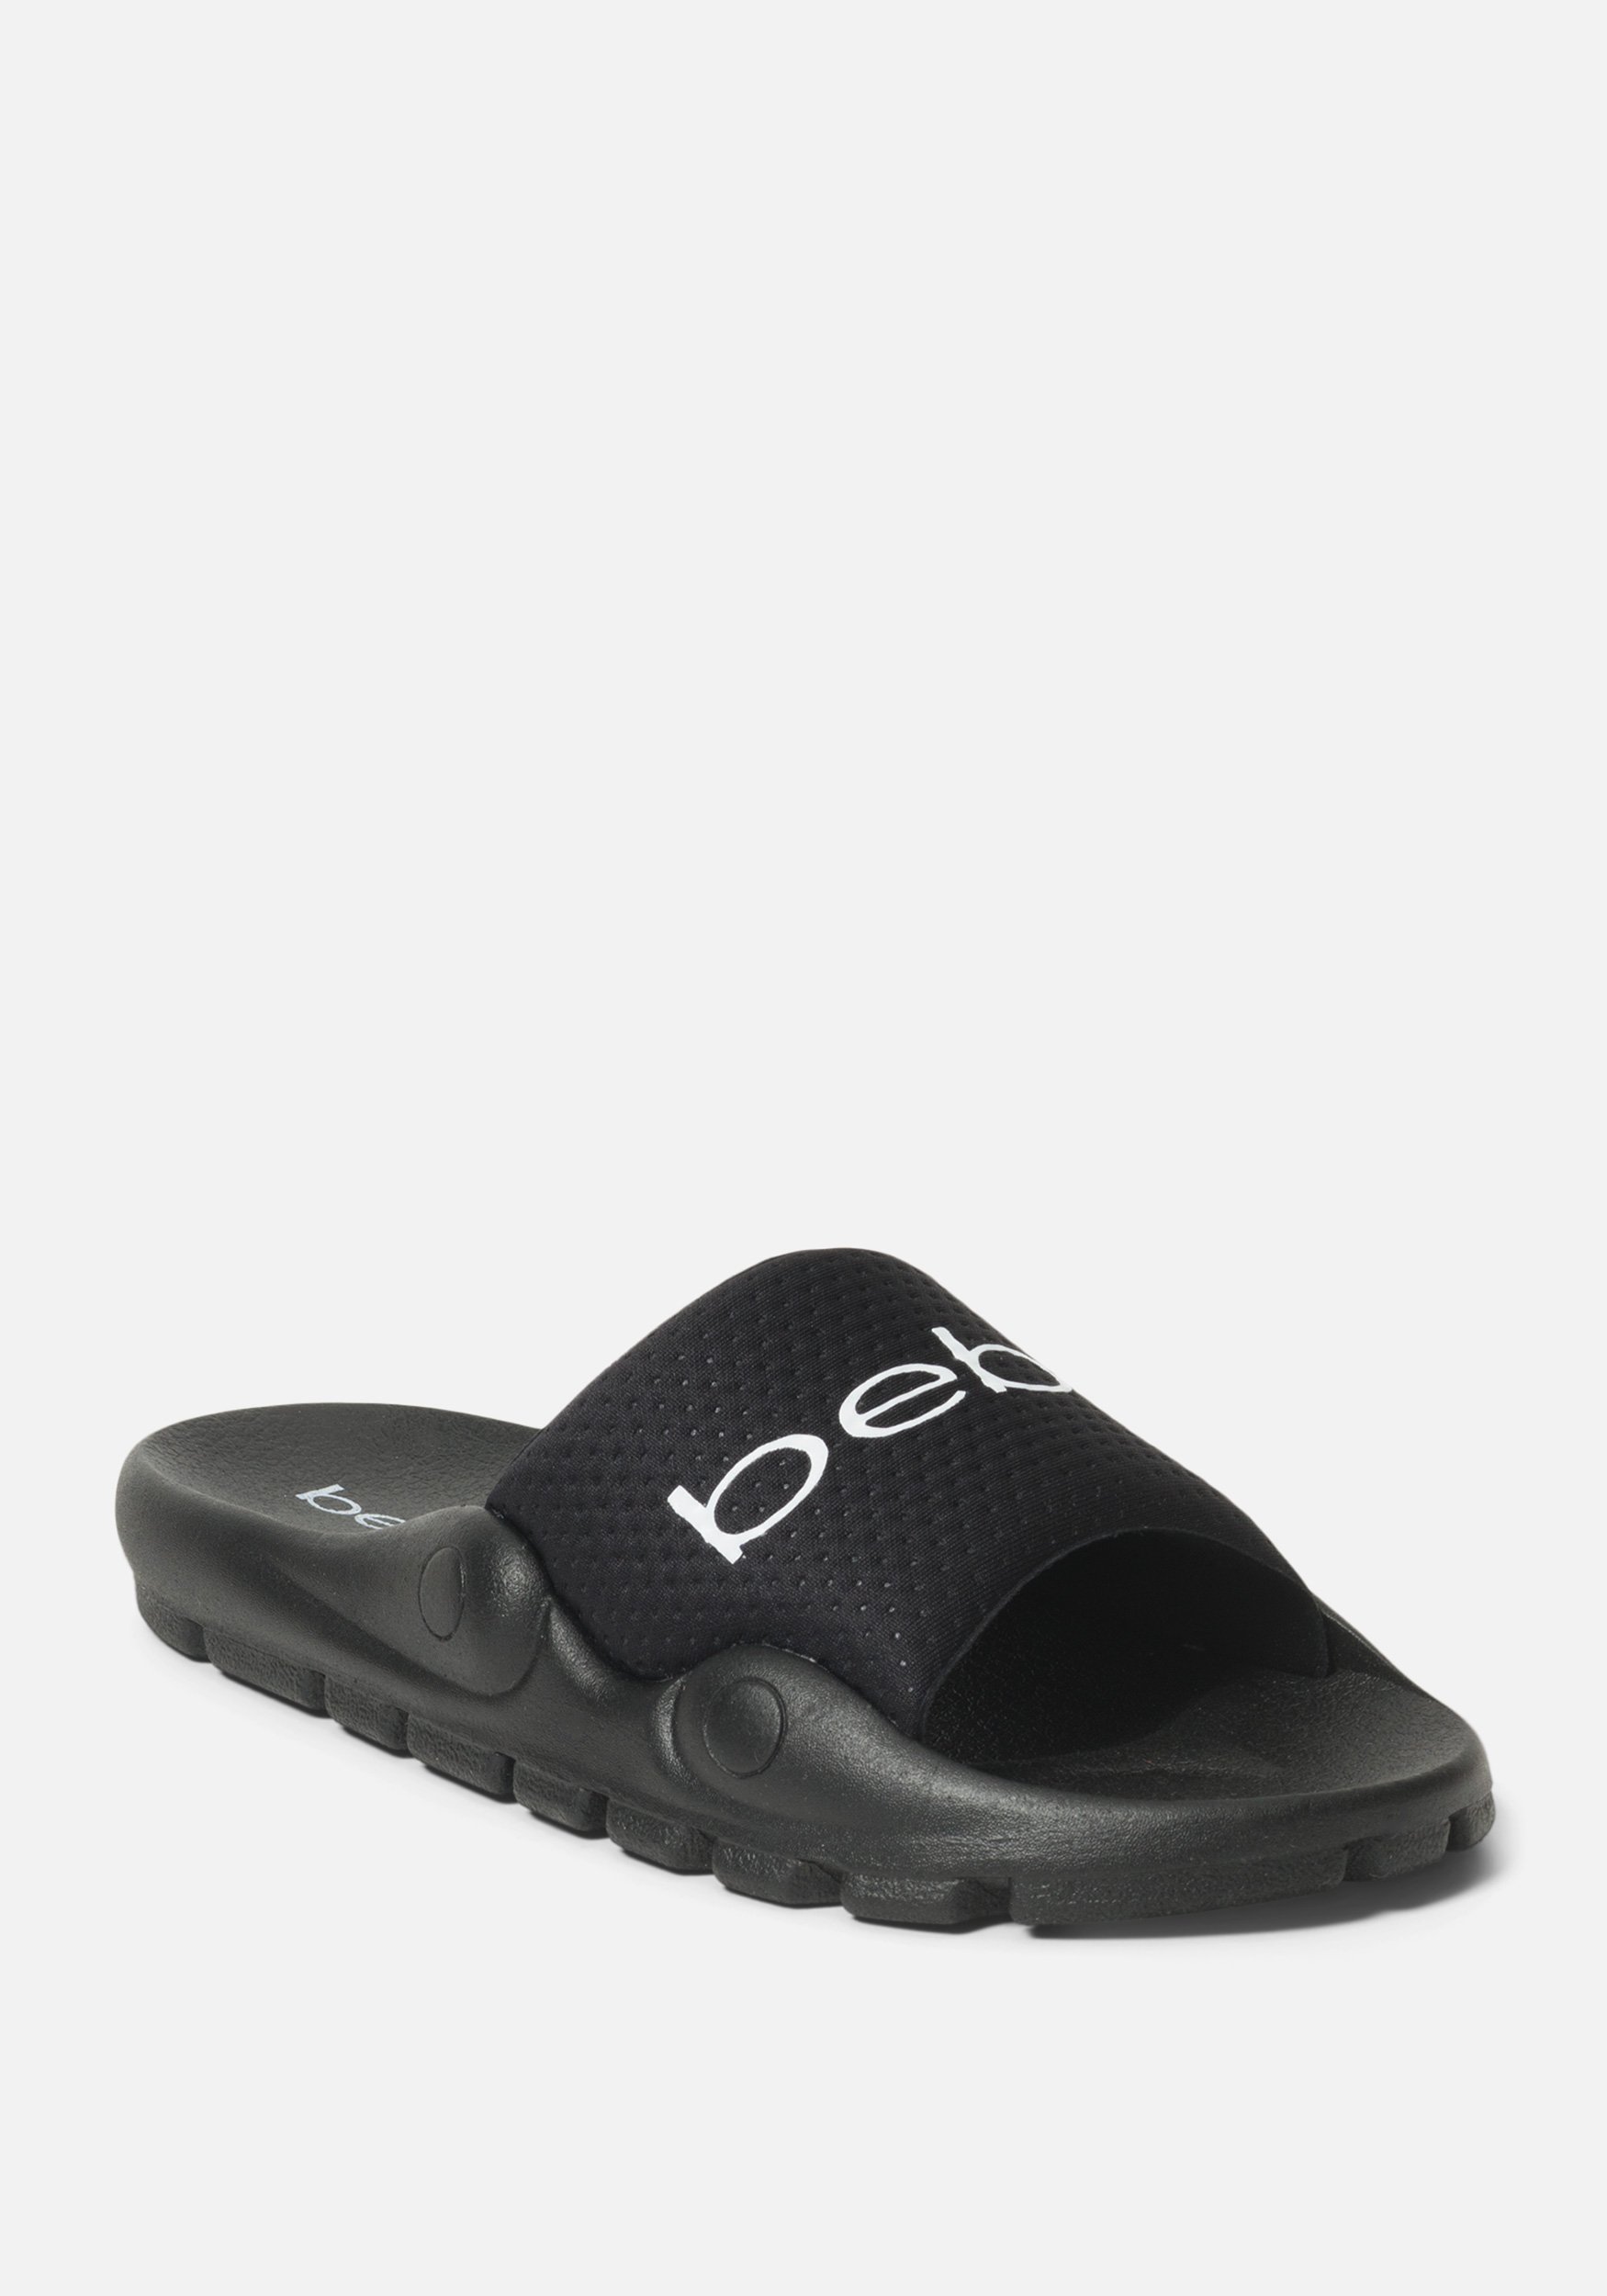 Bebe Women's Nayomie Sporty Slides Shoe, Size 11 in BLACK Synthetic